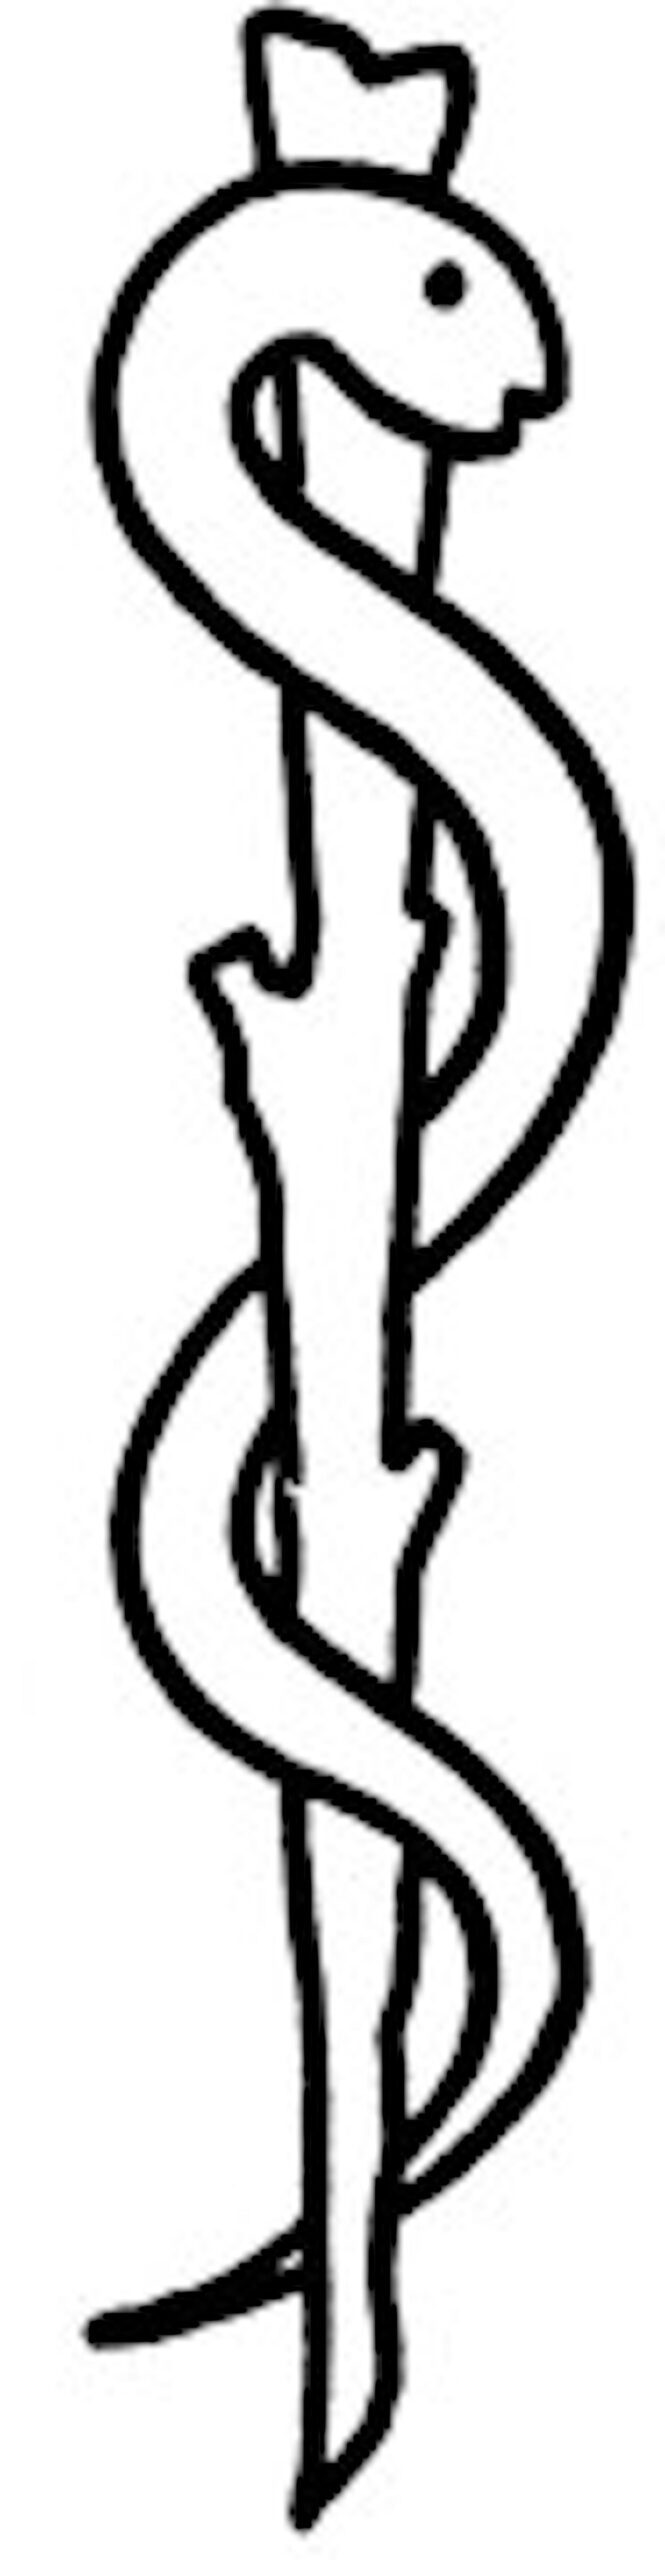 The Staff of Asclepius